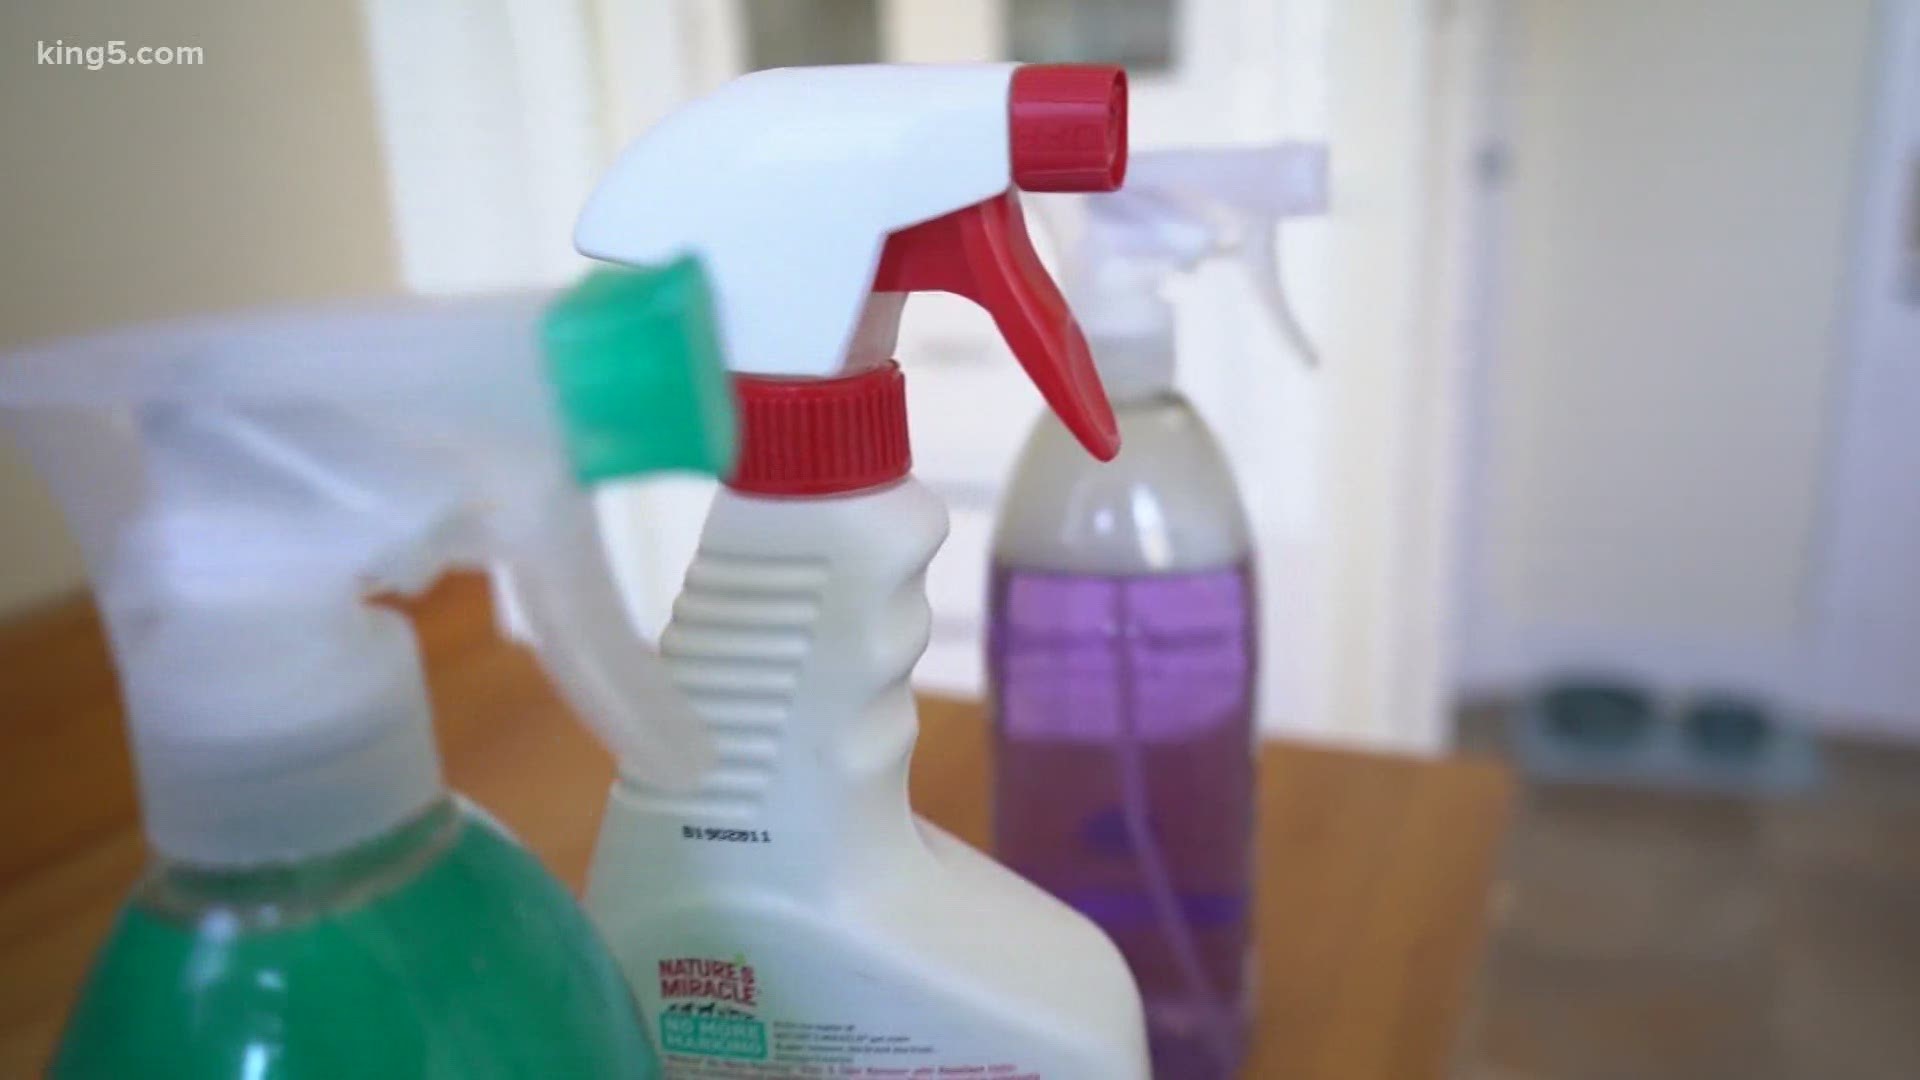 In Washington state and nationally, poison control calls are increasing. Most of them involve household cleaners and hand sanitizers.